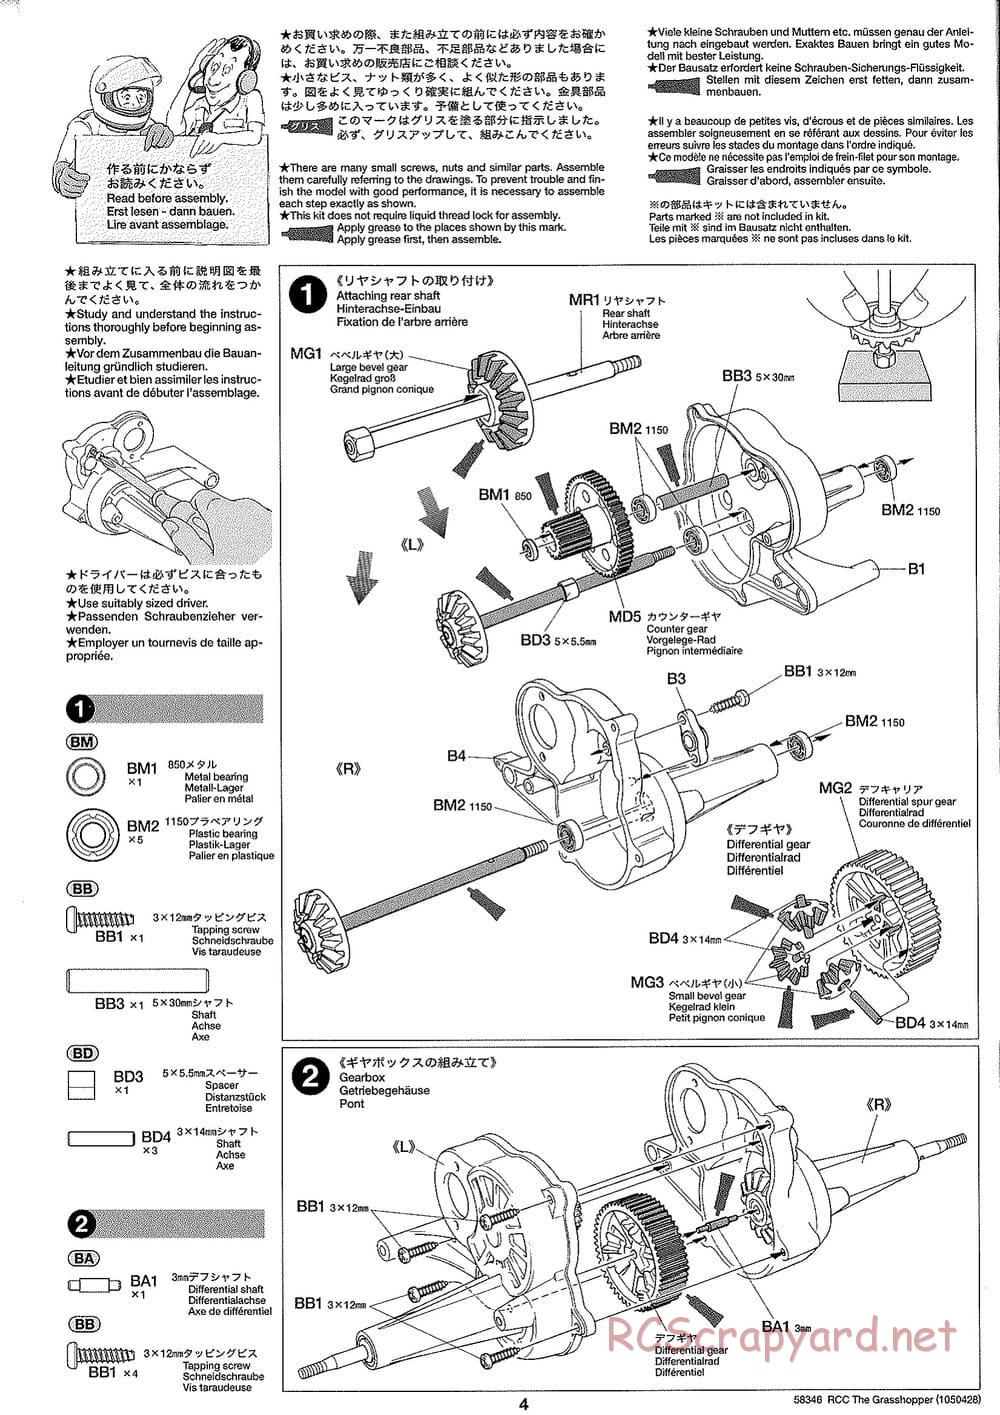 Tamiya - The Grasshopper (2005) - GH Chassis - Manual - Page 4